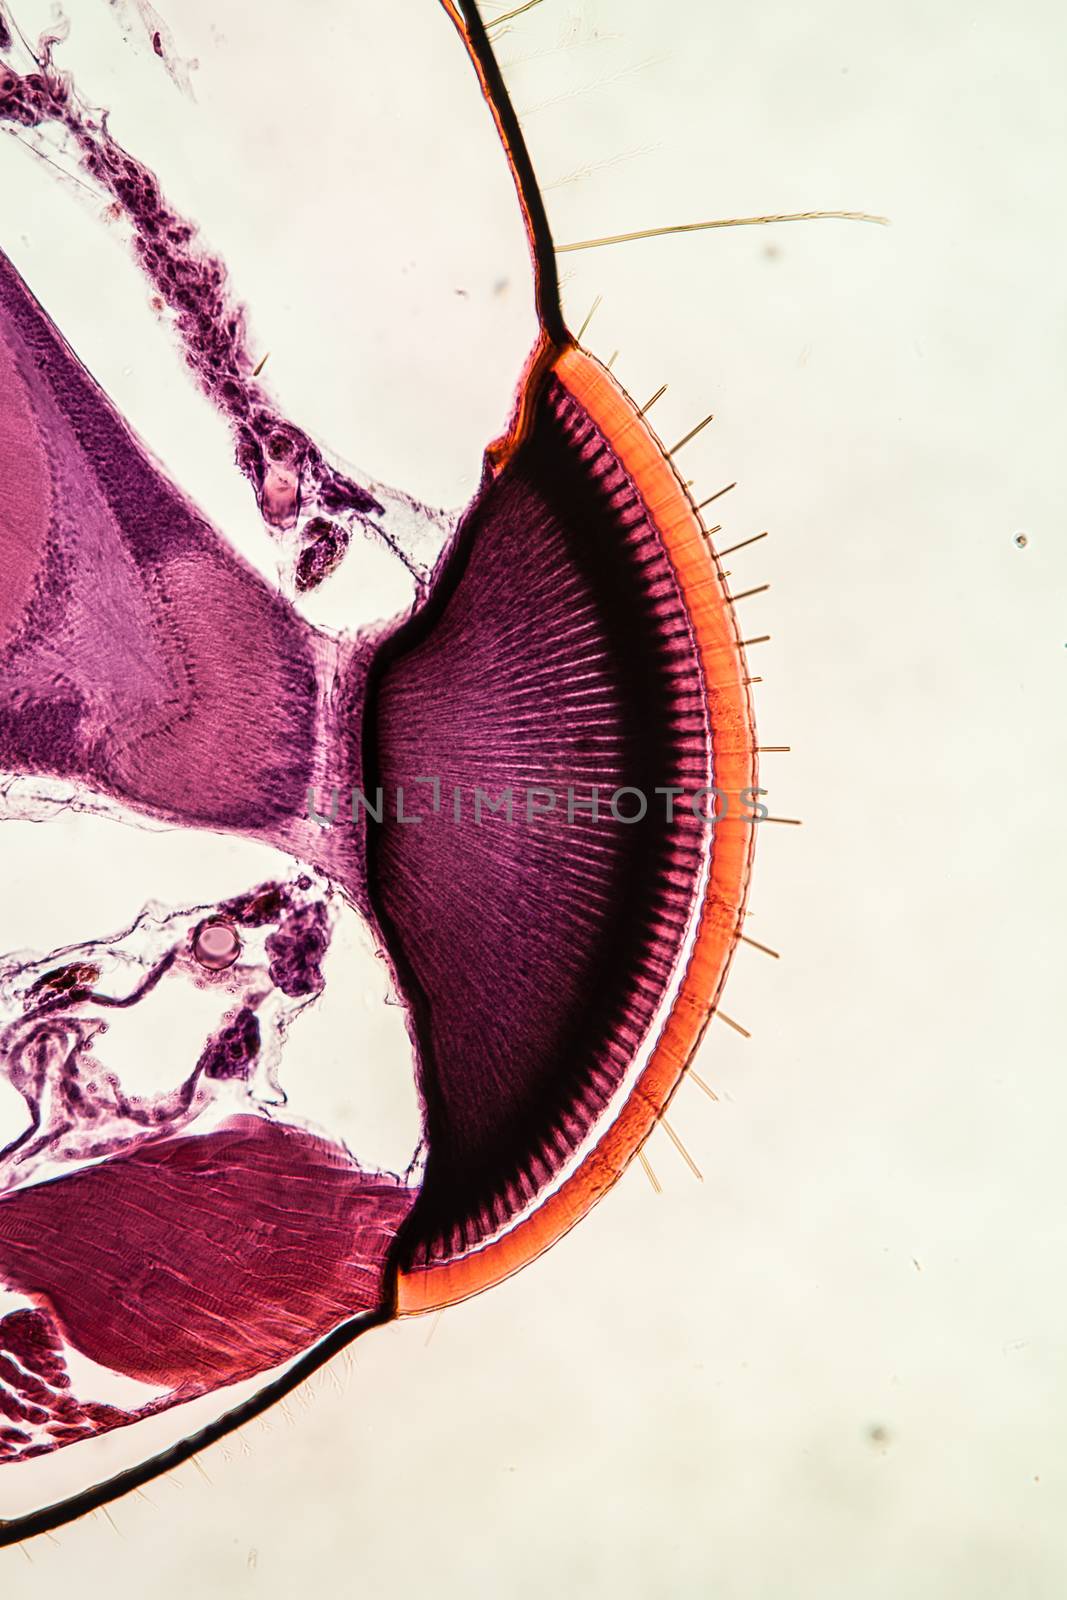 Bee compound eye enlarged 100x along by Dr-Lange